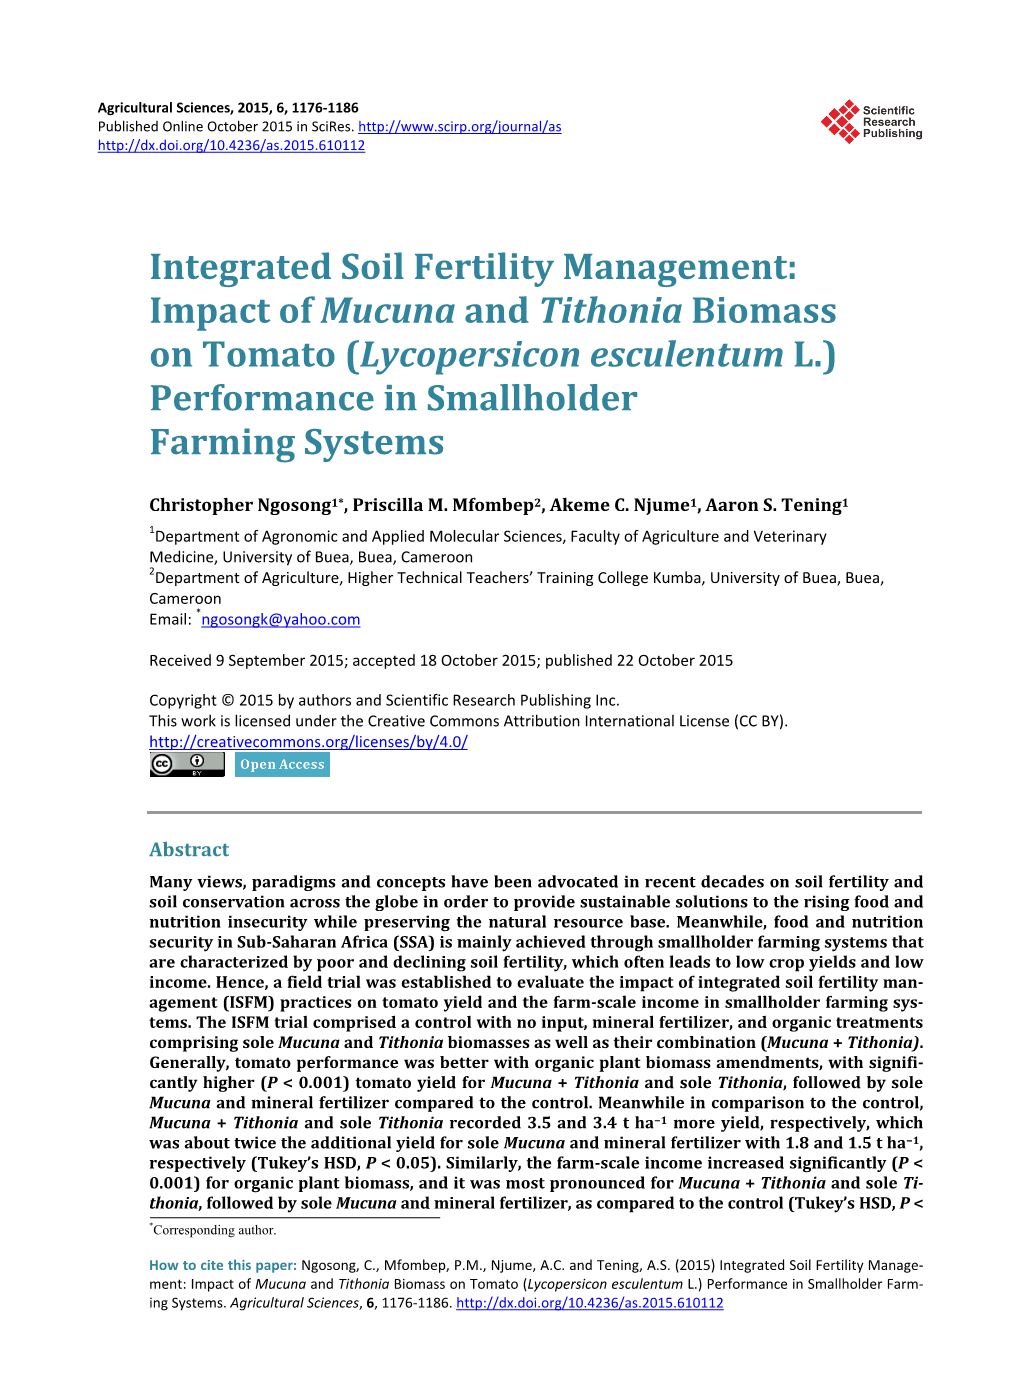 Integrated Soil Fertility Management: Impact of Mucuna and Tithonia Biomass on Tomato (Lycopersicon Esculentum L.) Performance in Smallholder Farming Systems